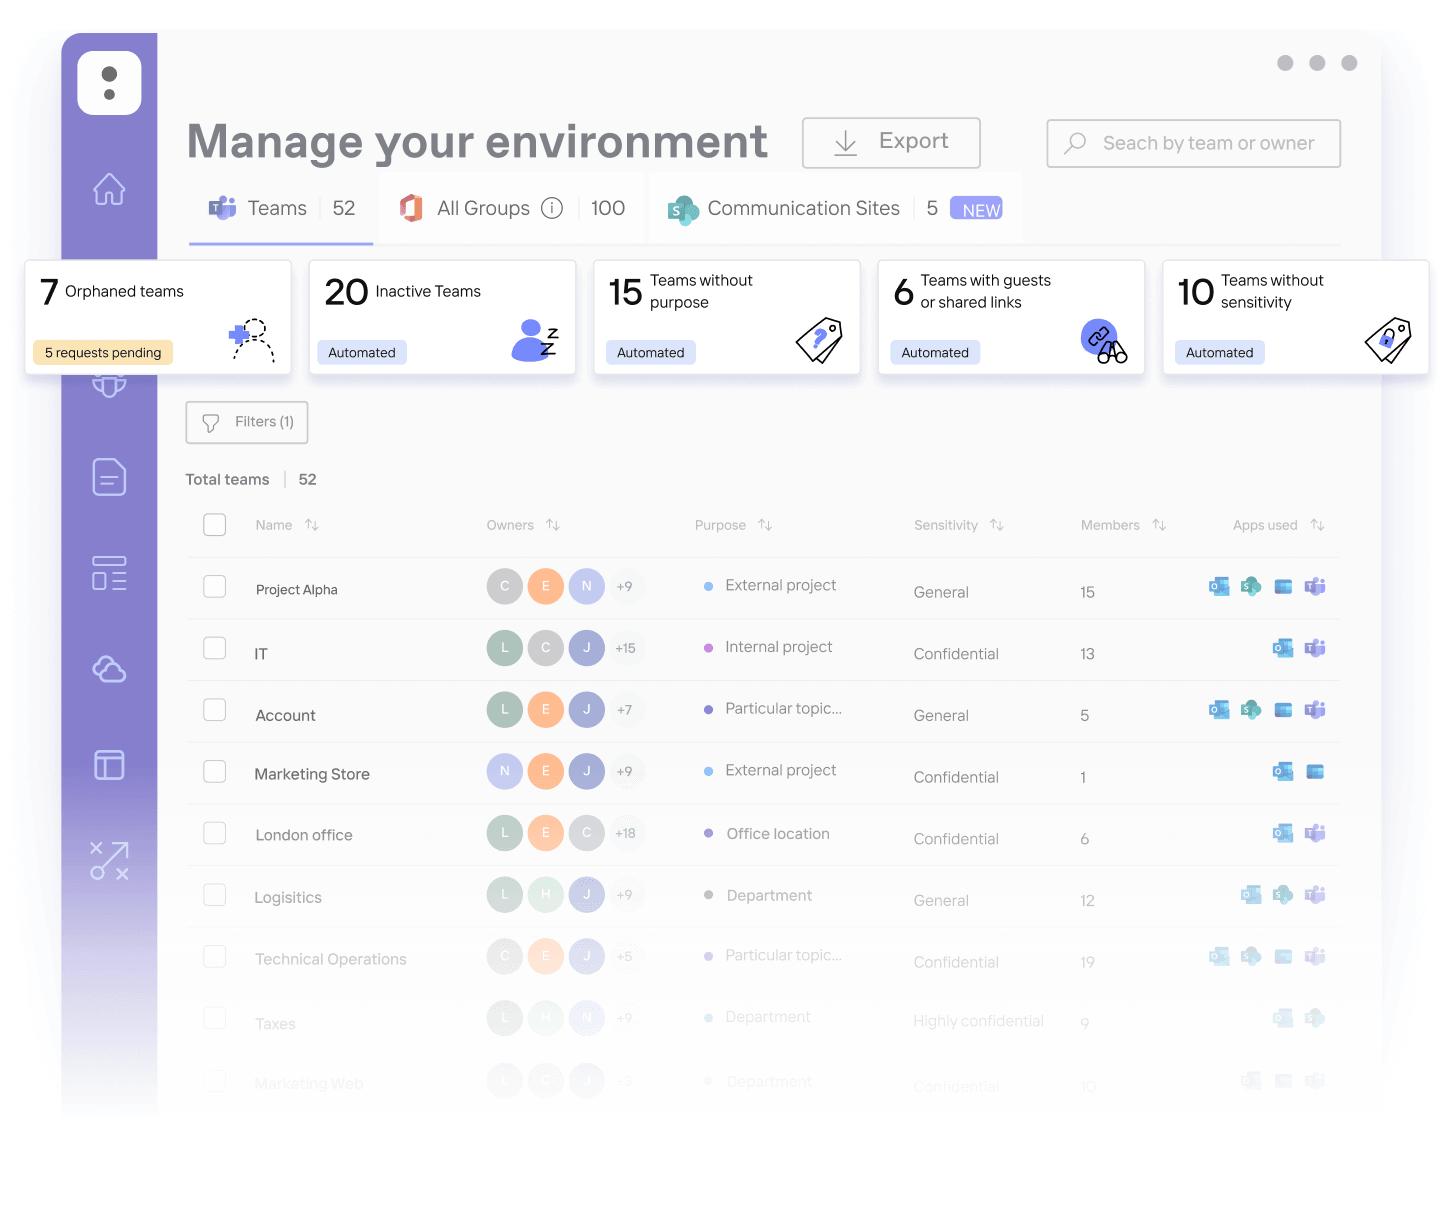 ShareGate's dashboard allows you to monitor your environment at a glance.